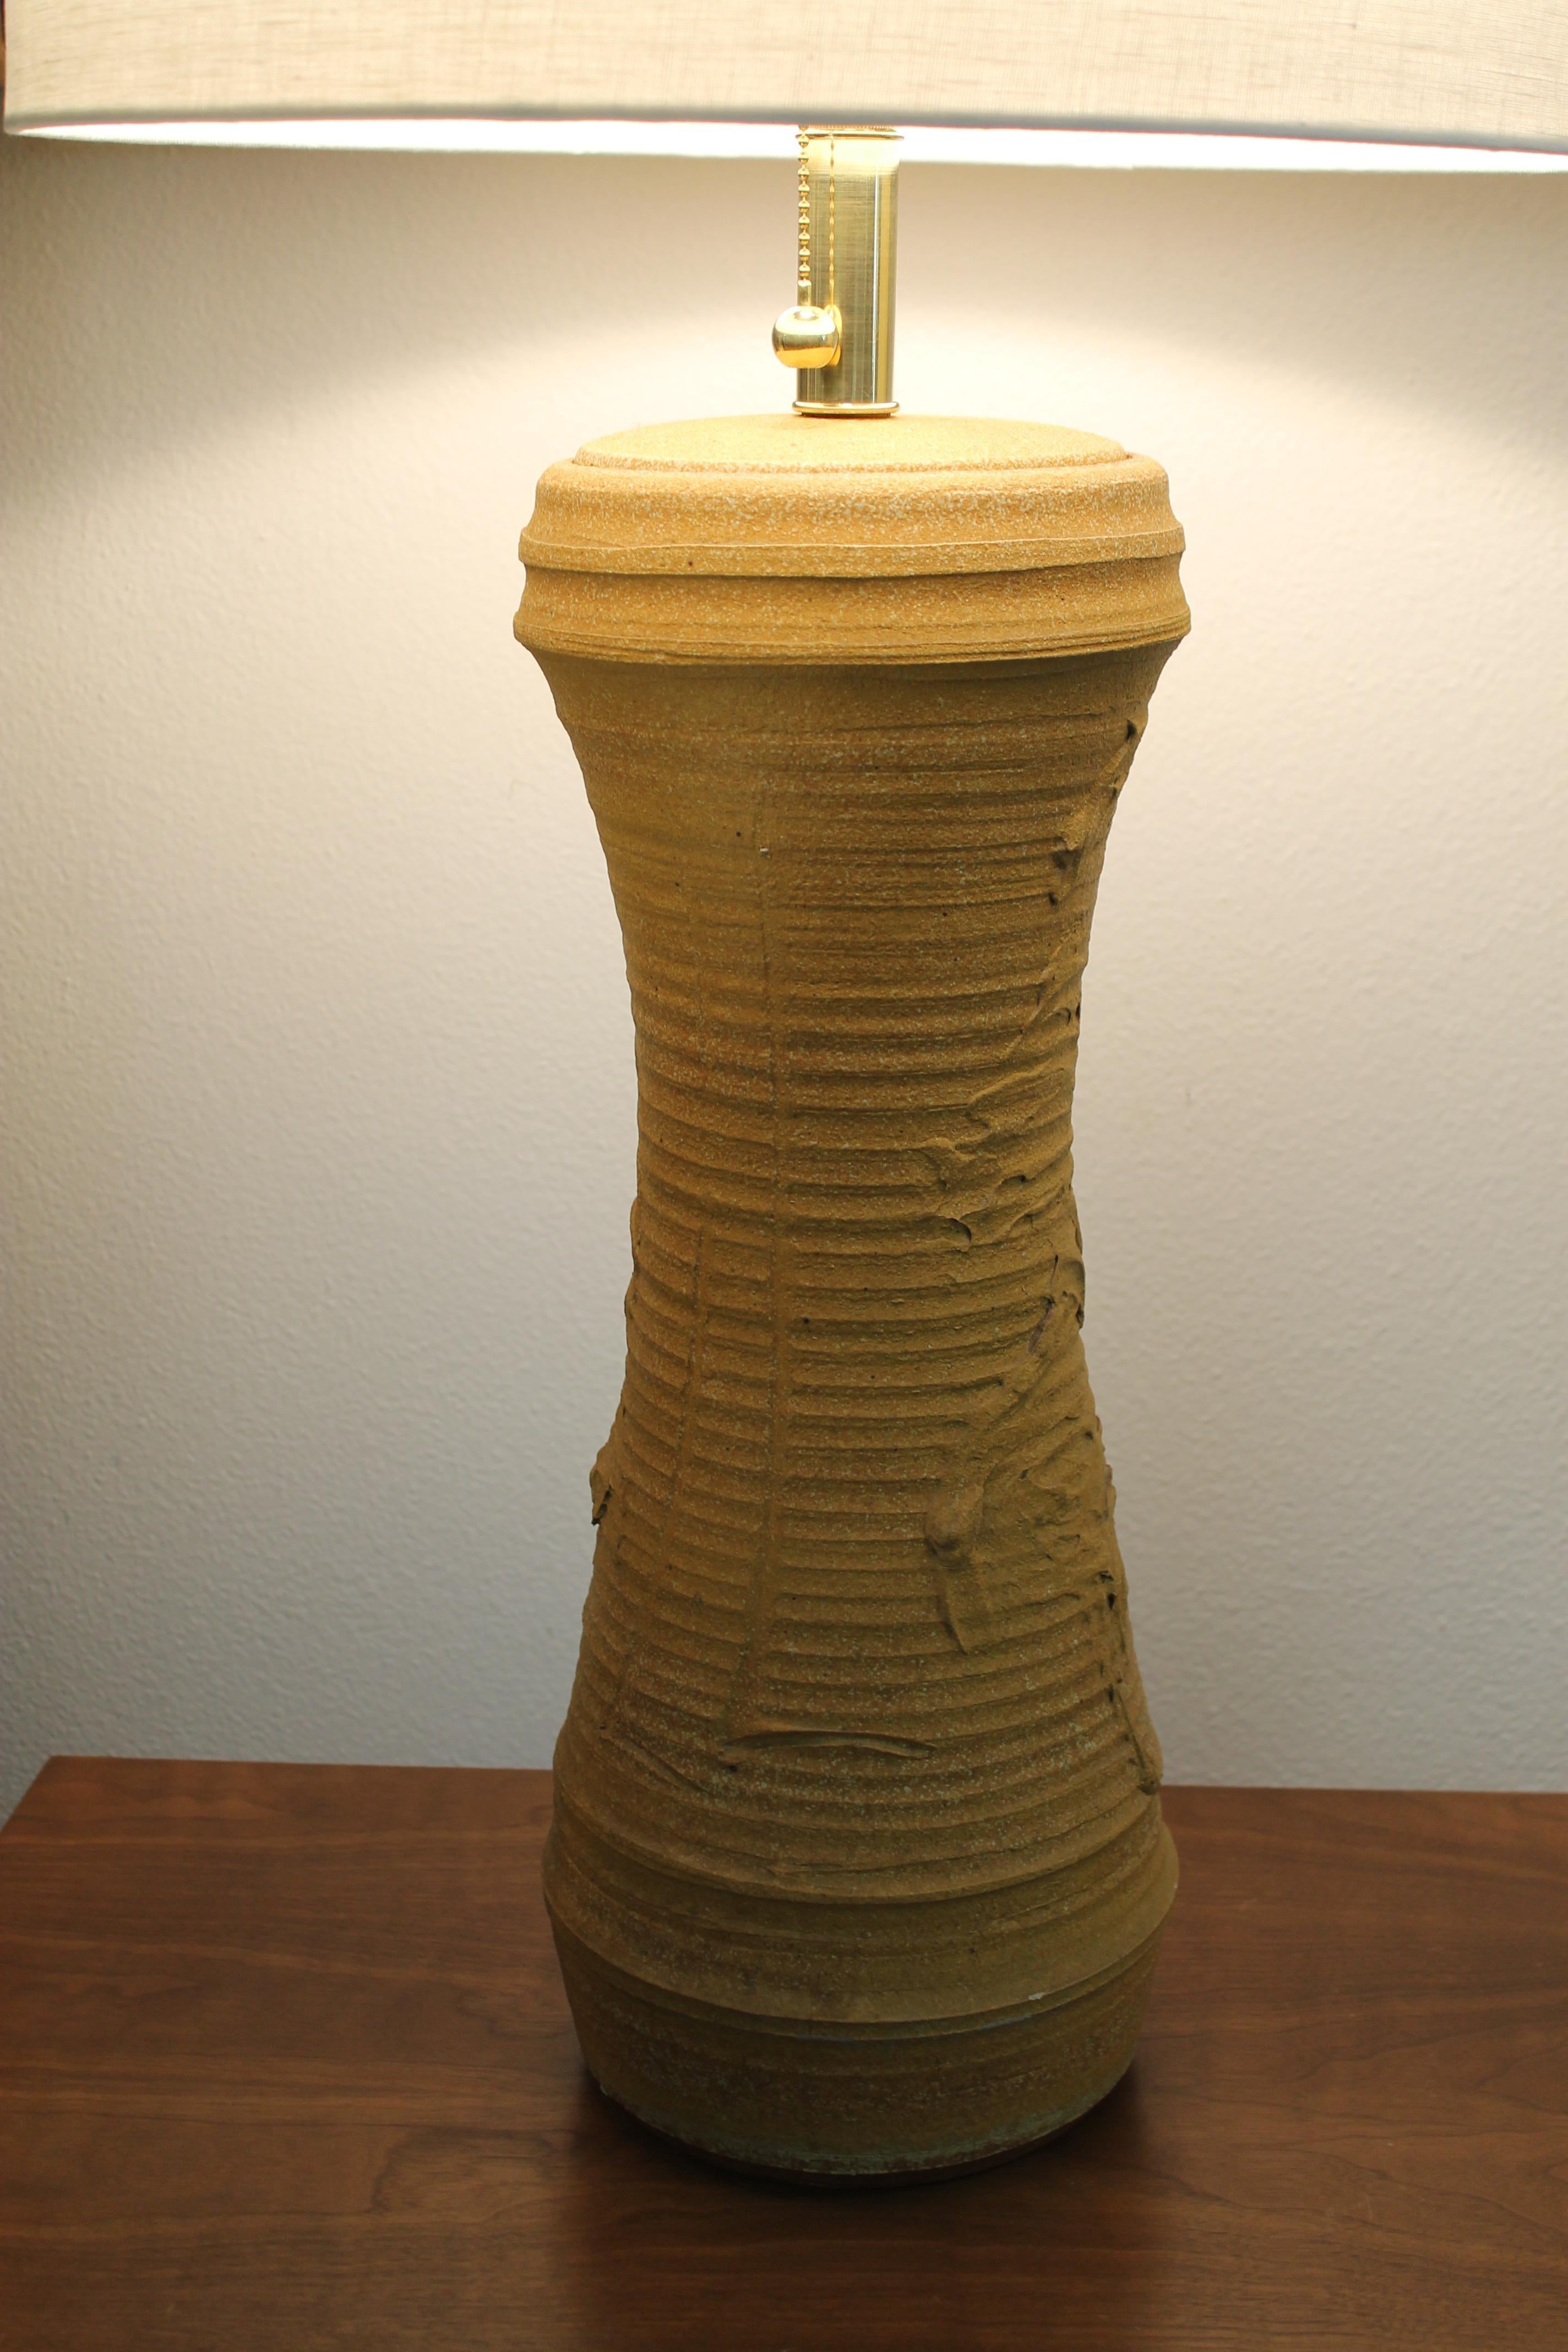 Ceramic lamp by Bob Kinzie for the Affiliated Craftsmen Lamp Company of Costa Mesa, CA.  Ceramic portion measures 21